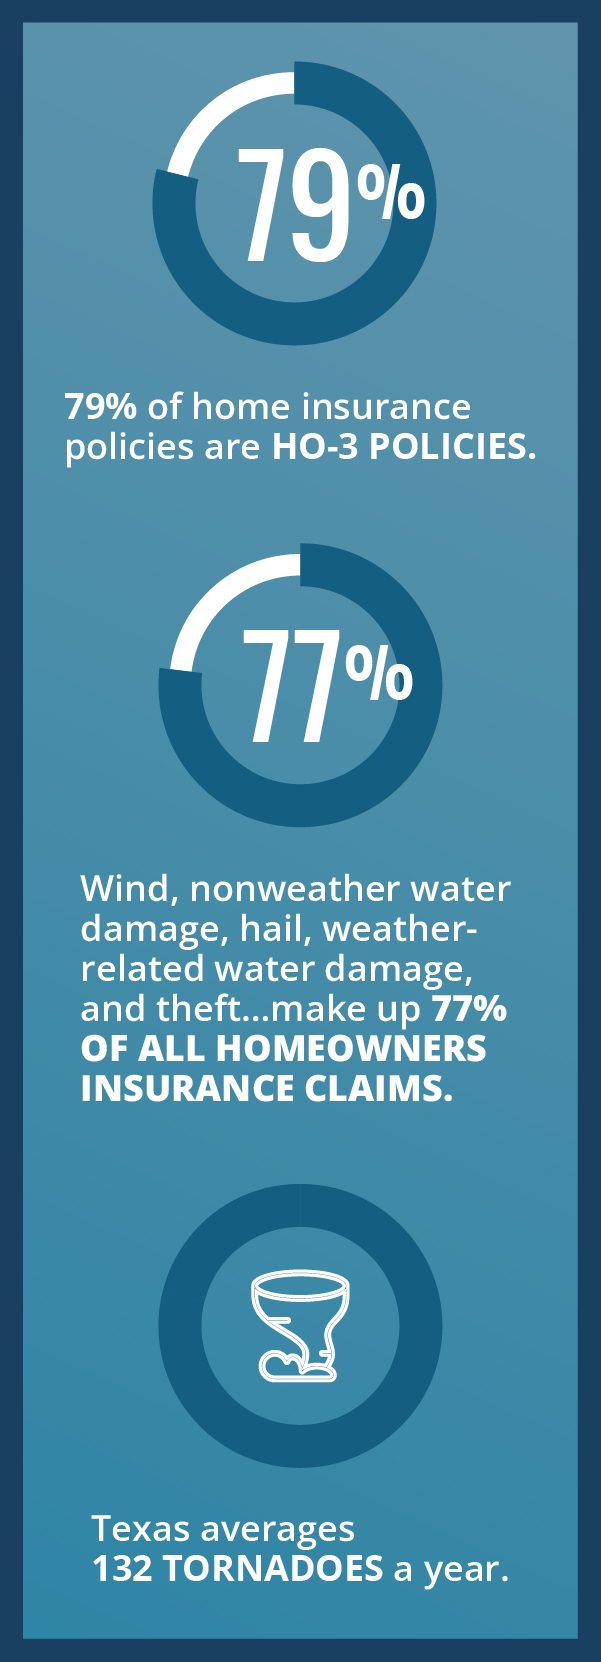 Graphic showing the home insurance policy statistics in Texas